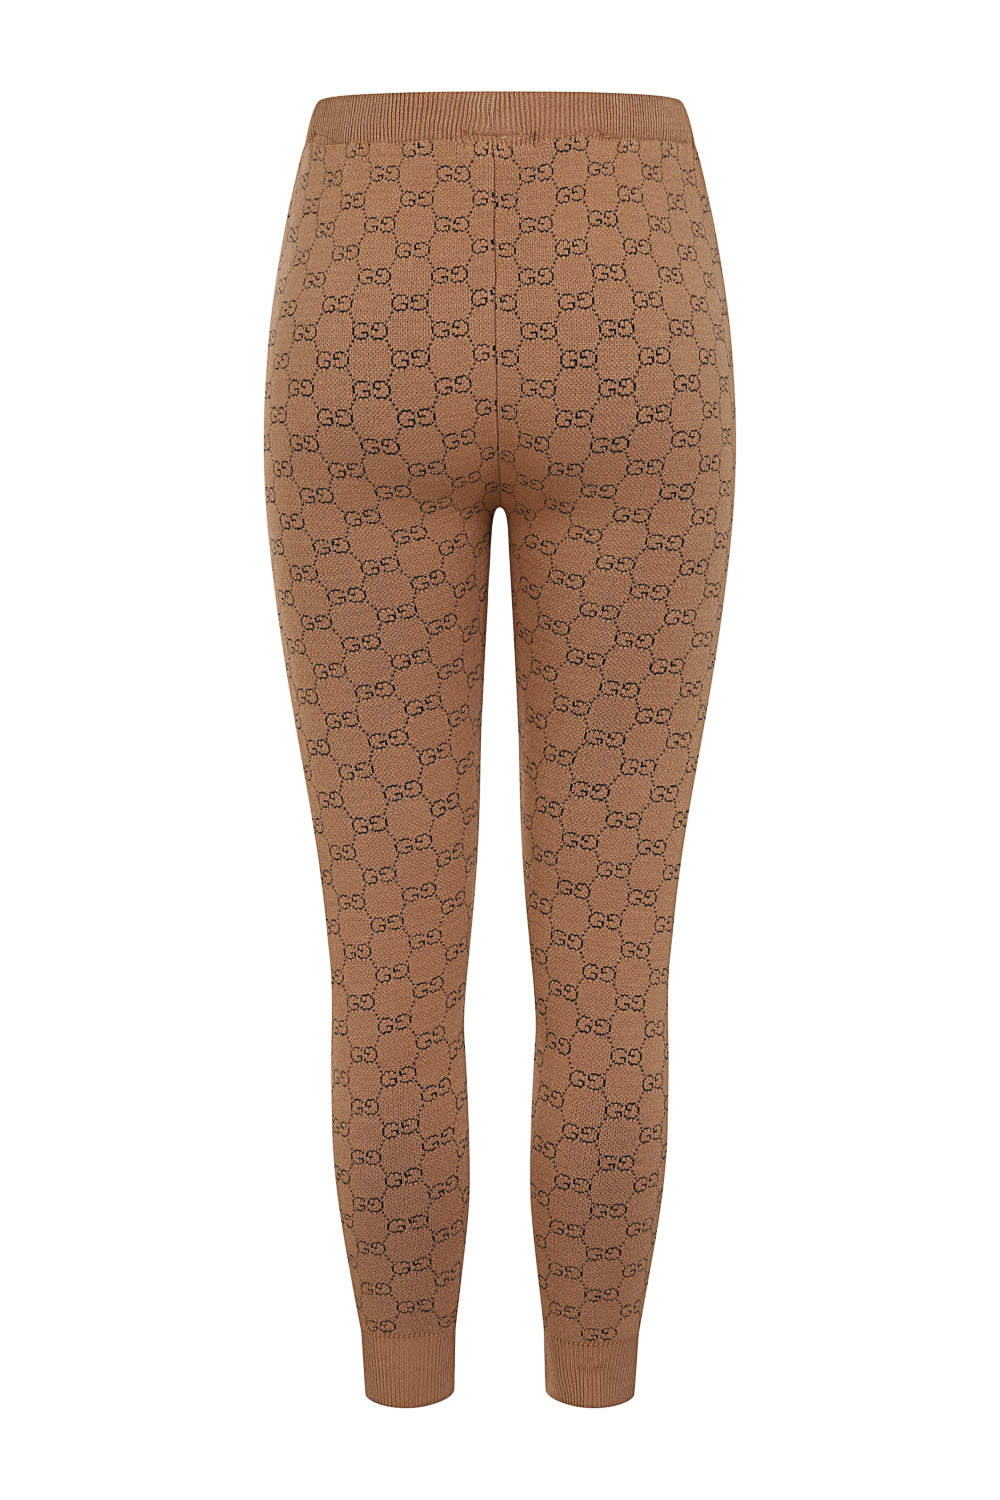 Giselle Camel Tan GG Inspired Woven Knit Body Hugging Stretch Leggings –  Nazz Collection